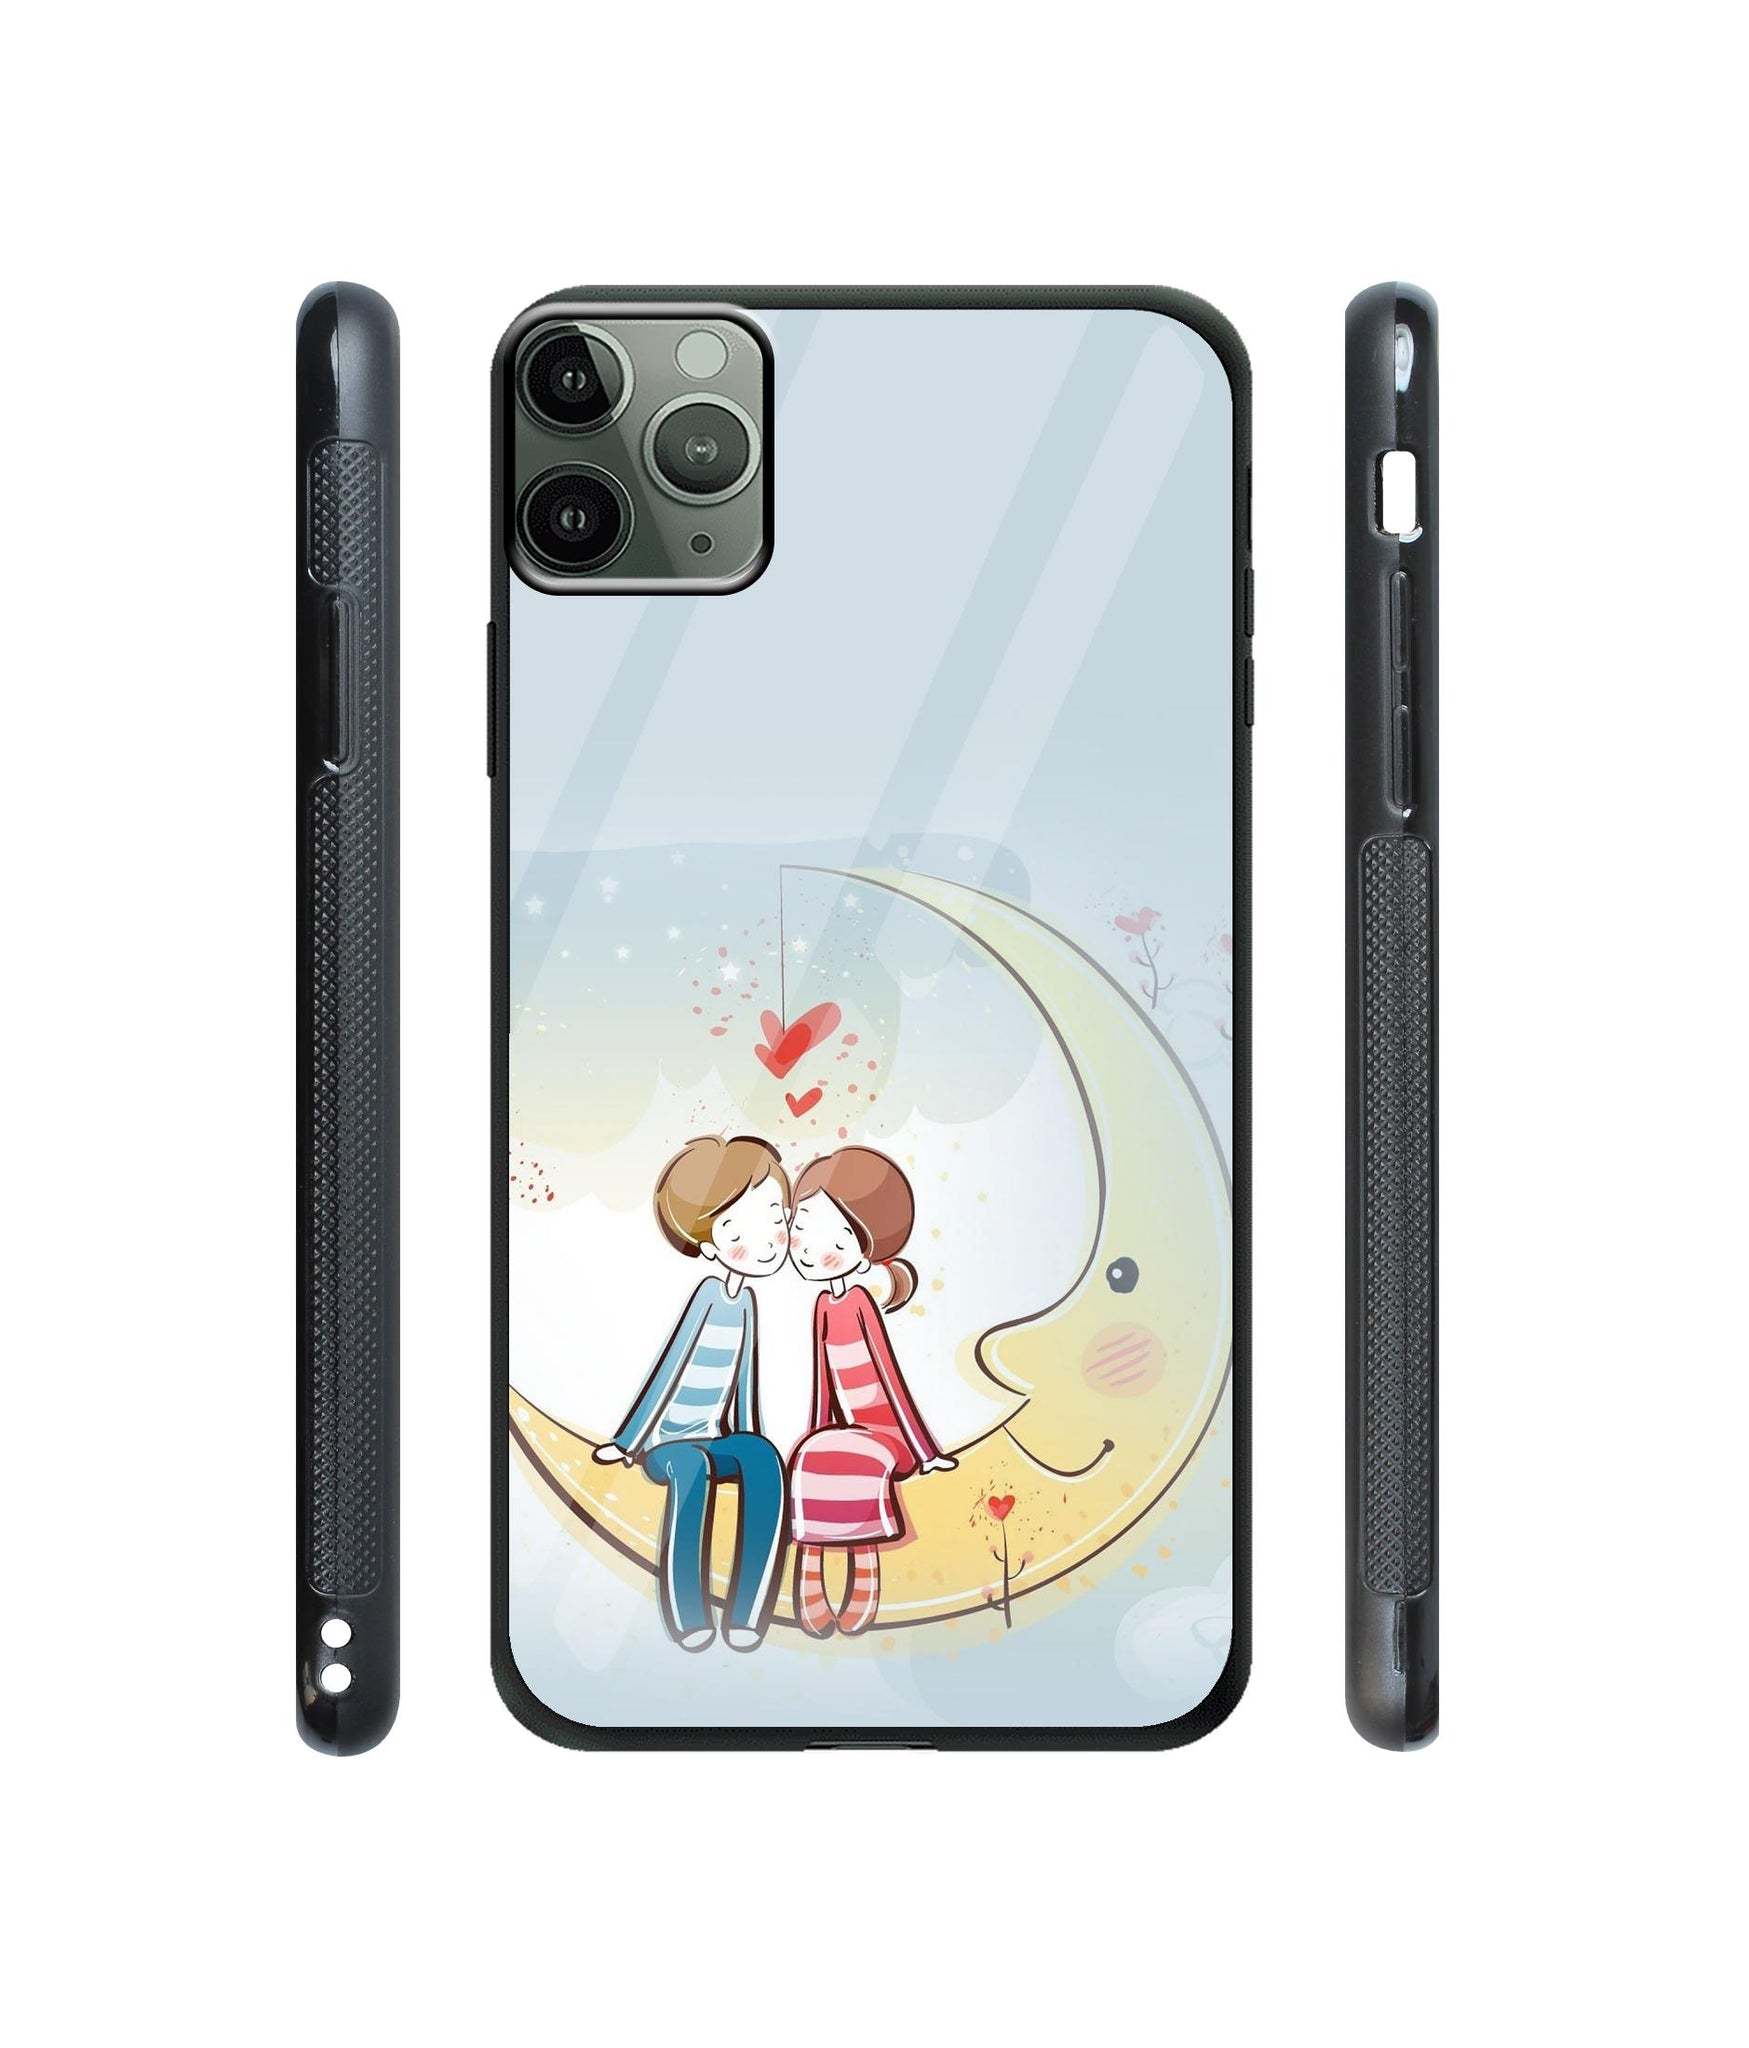 Couple Sitting On Moon Designer Printed Glass Cover for Apple iPhone 11 Pro